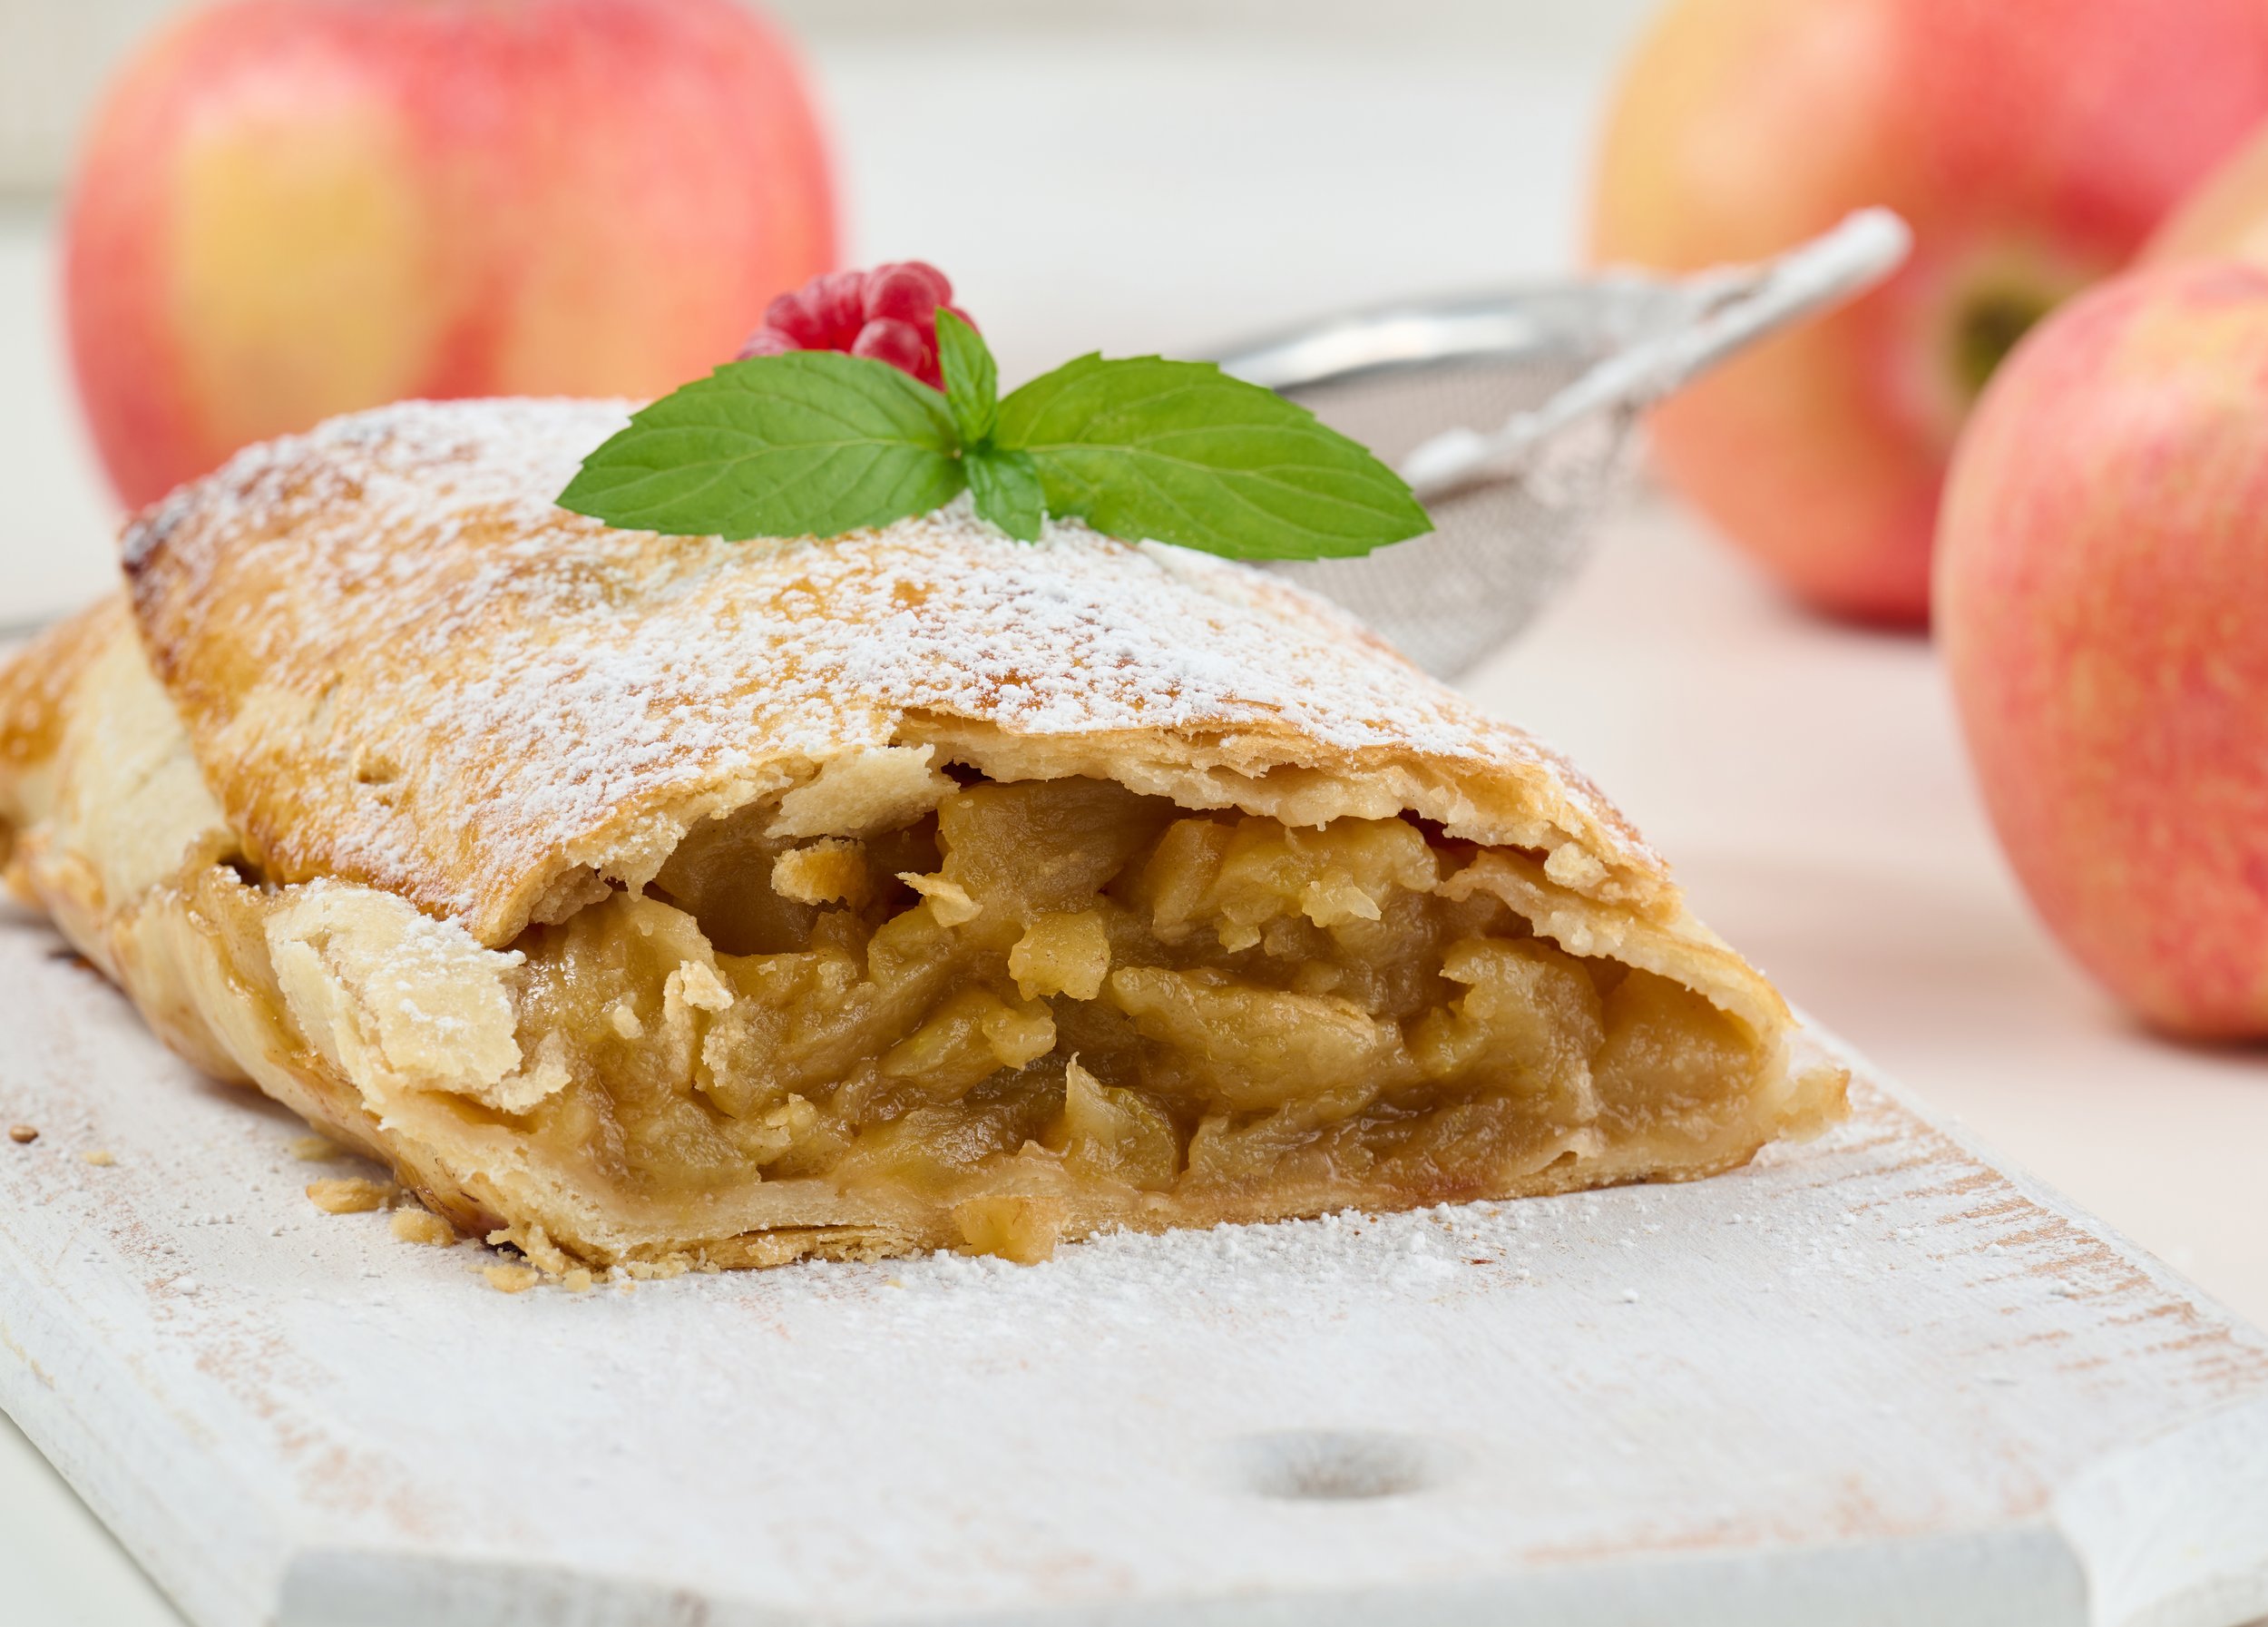 baked-strudel-with-apples-sprinkled-with-powdered-sugar-white-wooden-board-delicious-dessert.jpg